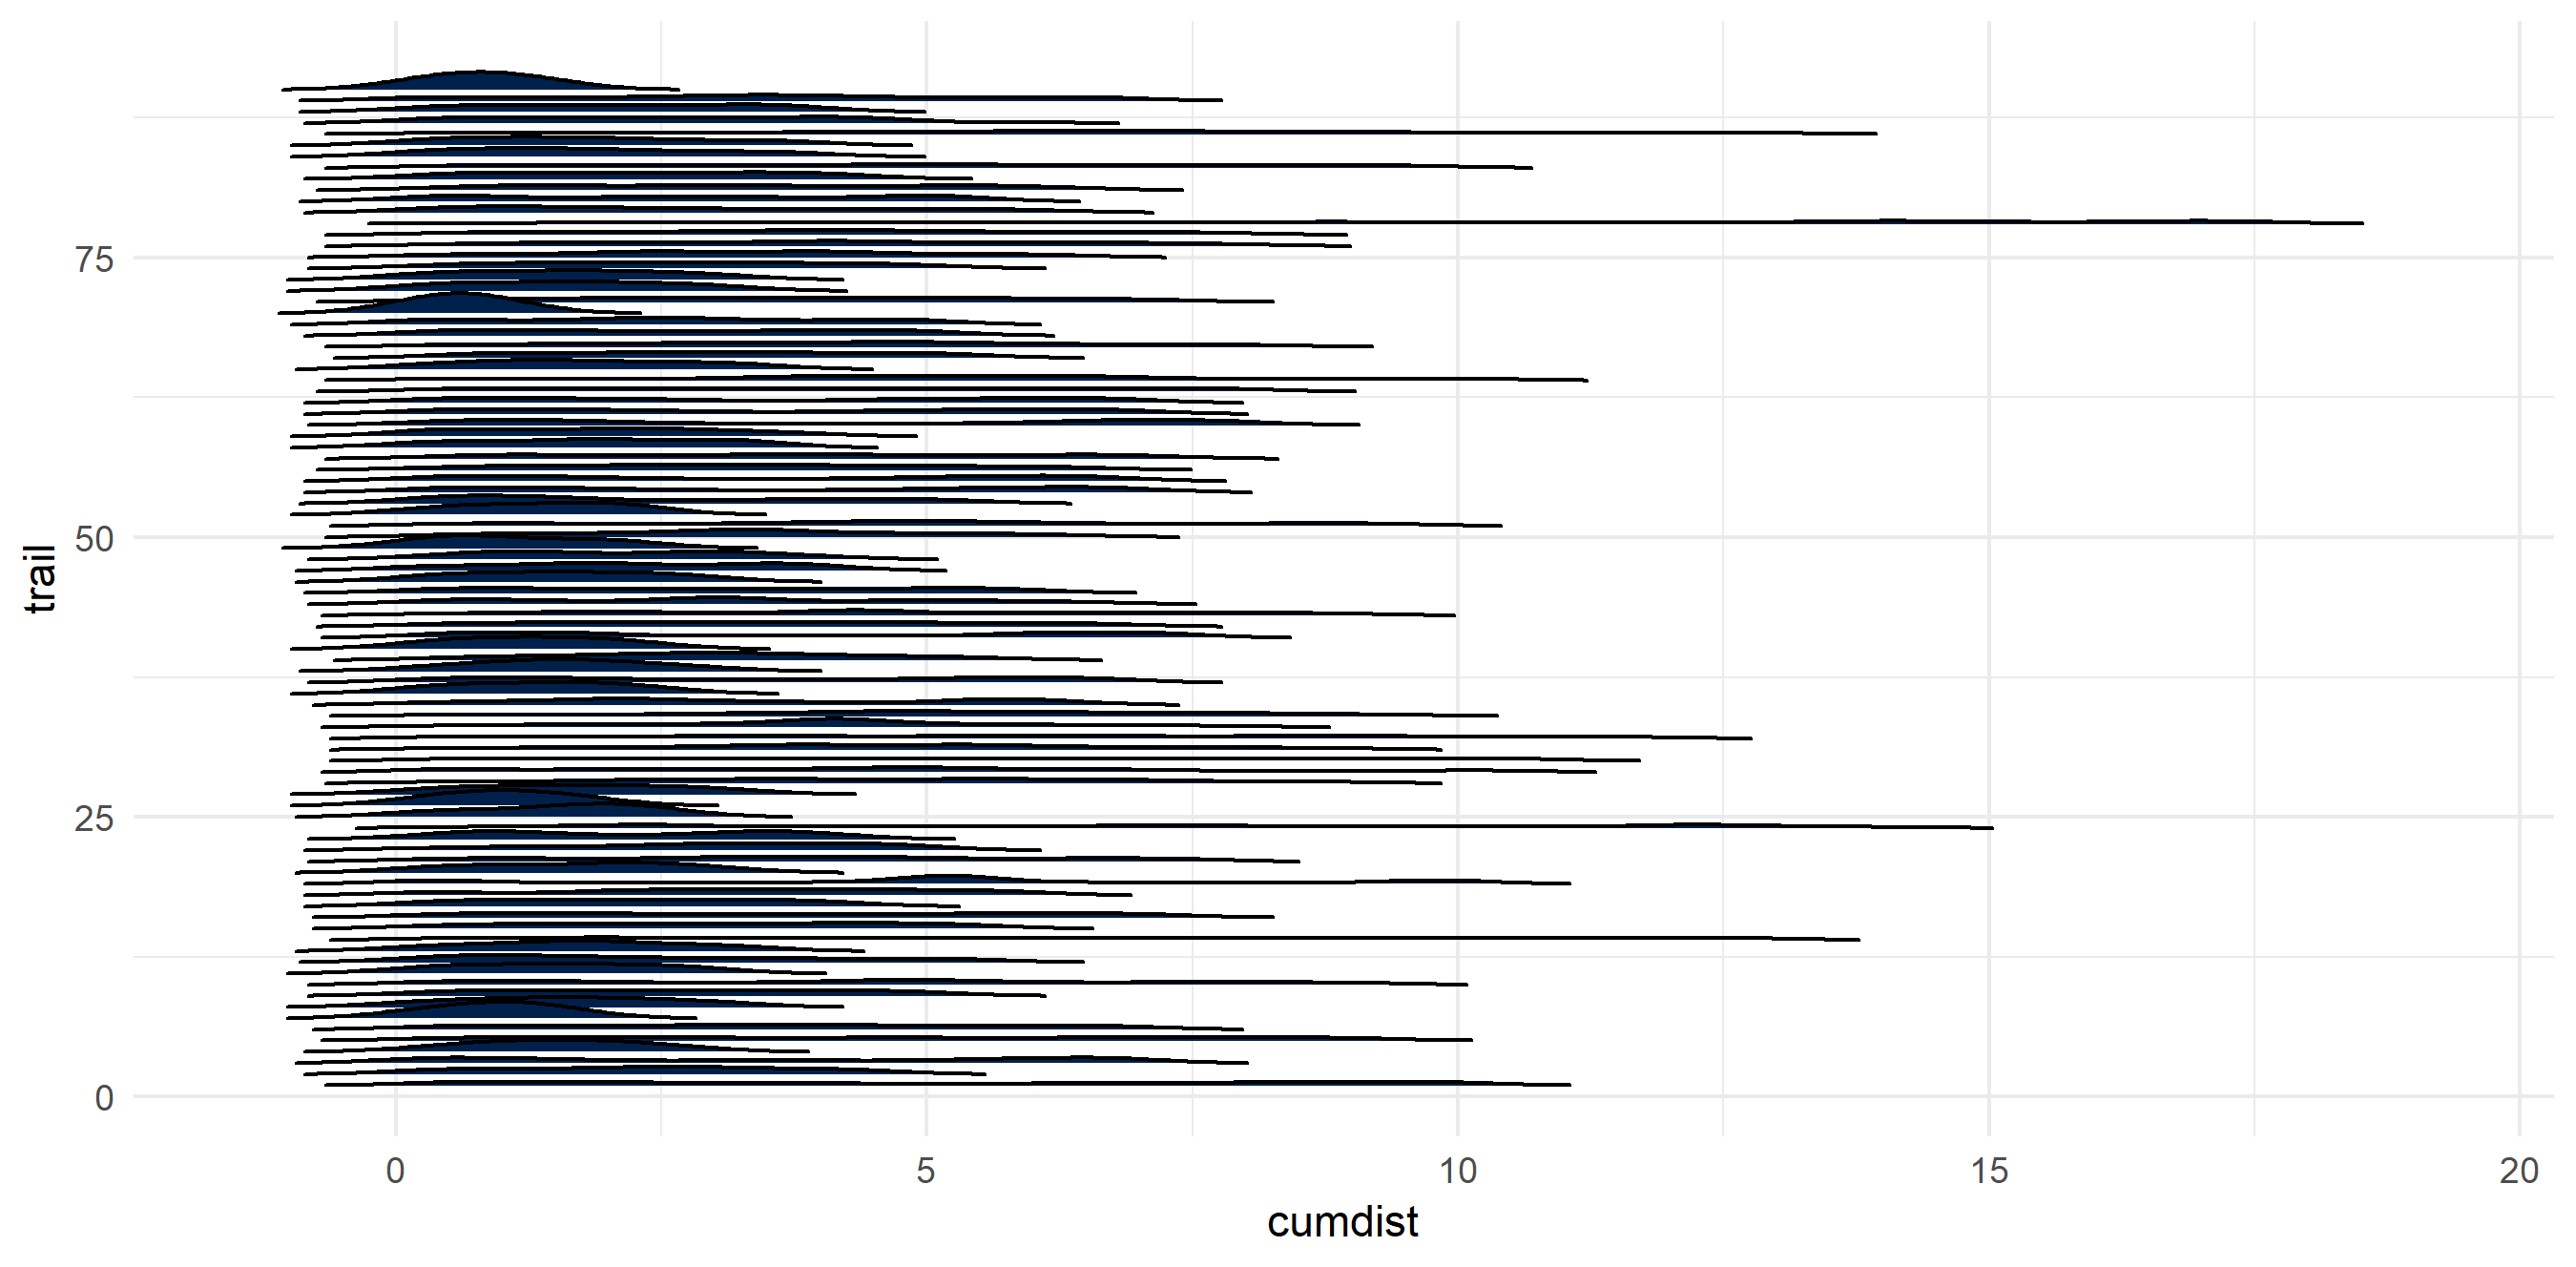 Joyplot showing trail distance and height